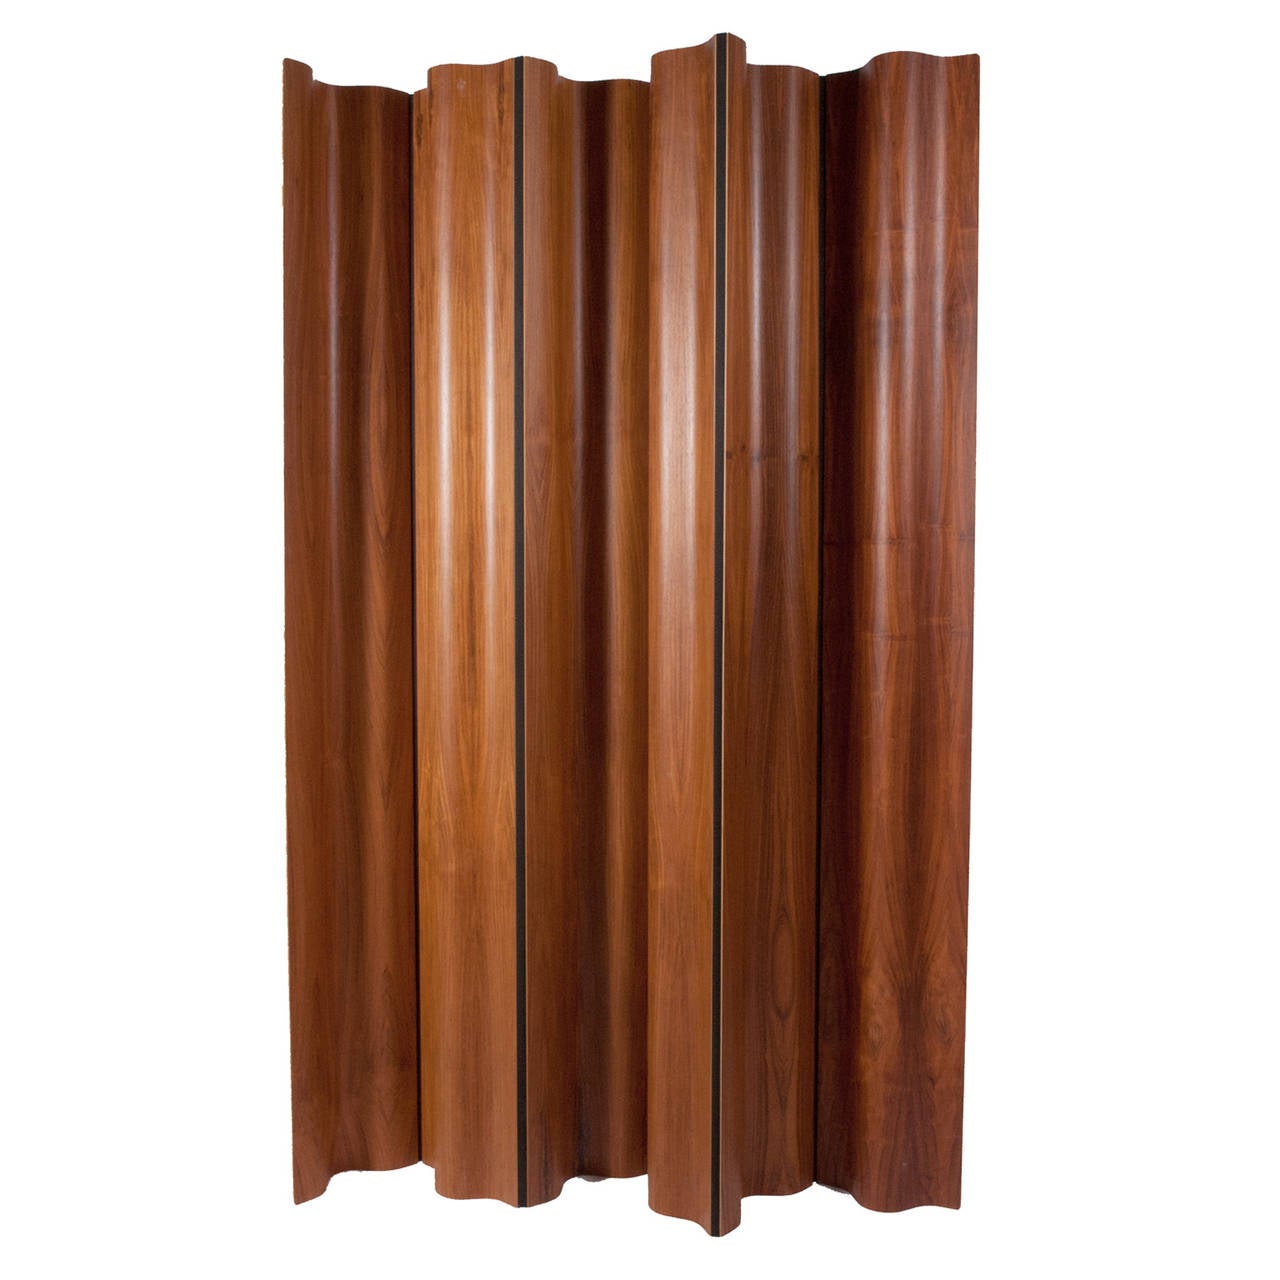 Rosewood folding screen with synthetic fabric strip connectors. Rosewood was discontinued in the late 1980s due to the unsustainable harvesting. Old rosewood stock used by Herman Miller for 500 each LCW and FSW-6 folding screen for their 50th